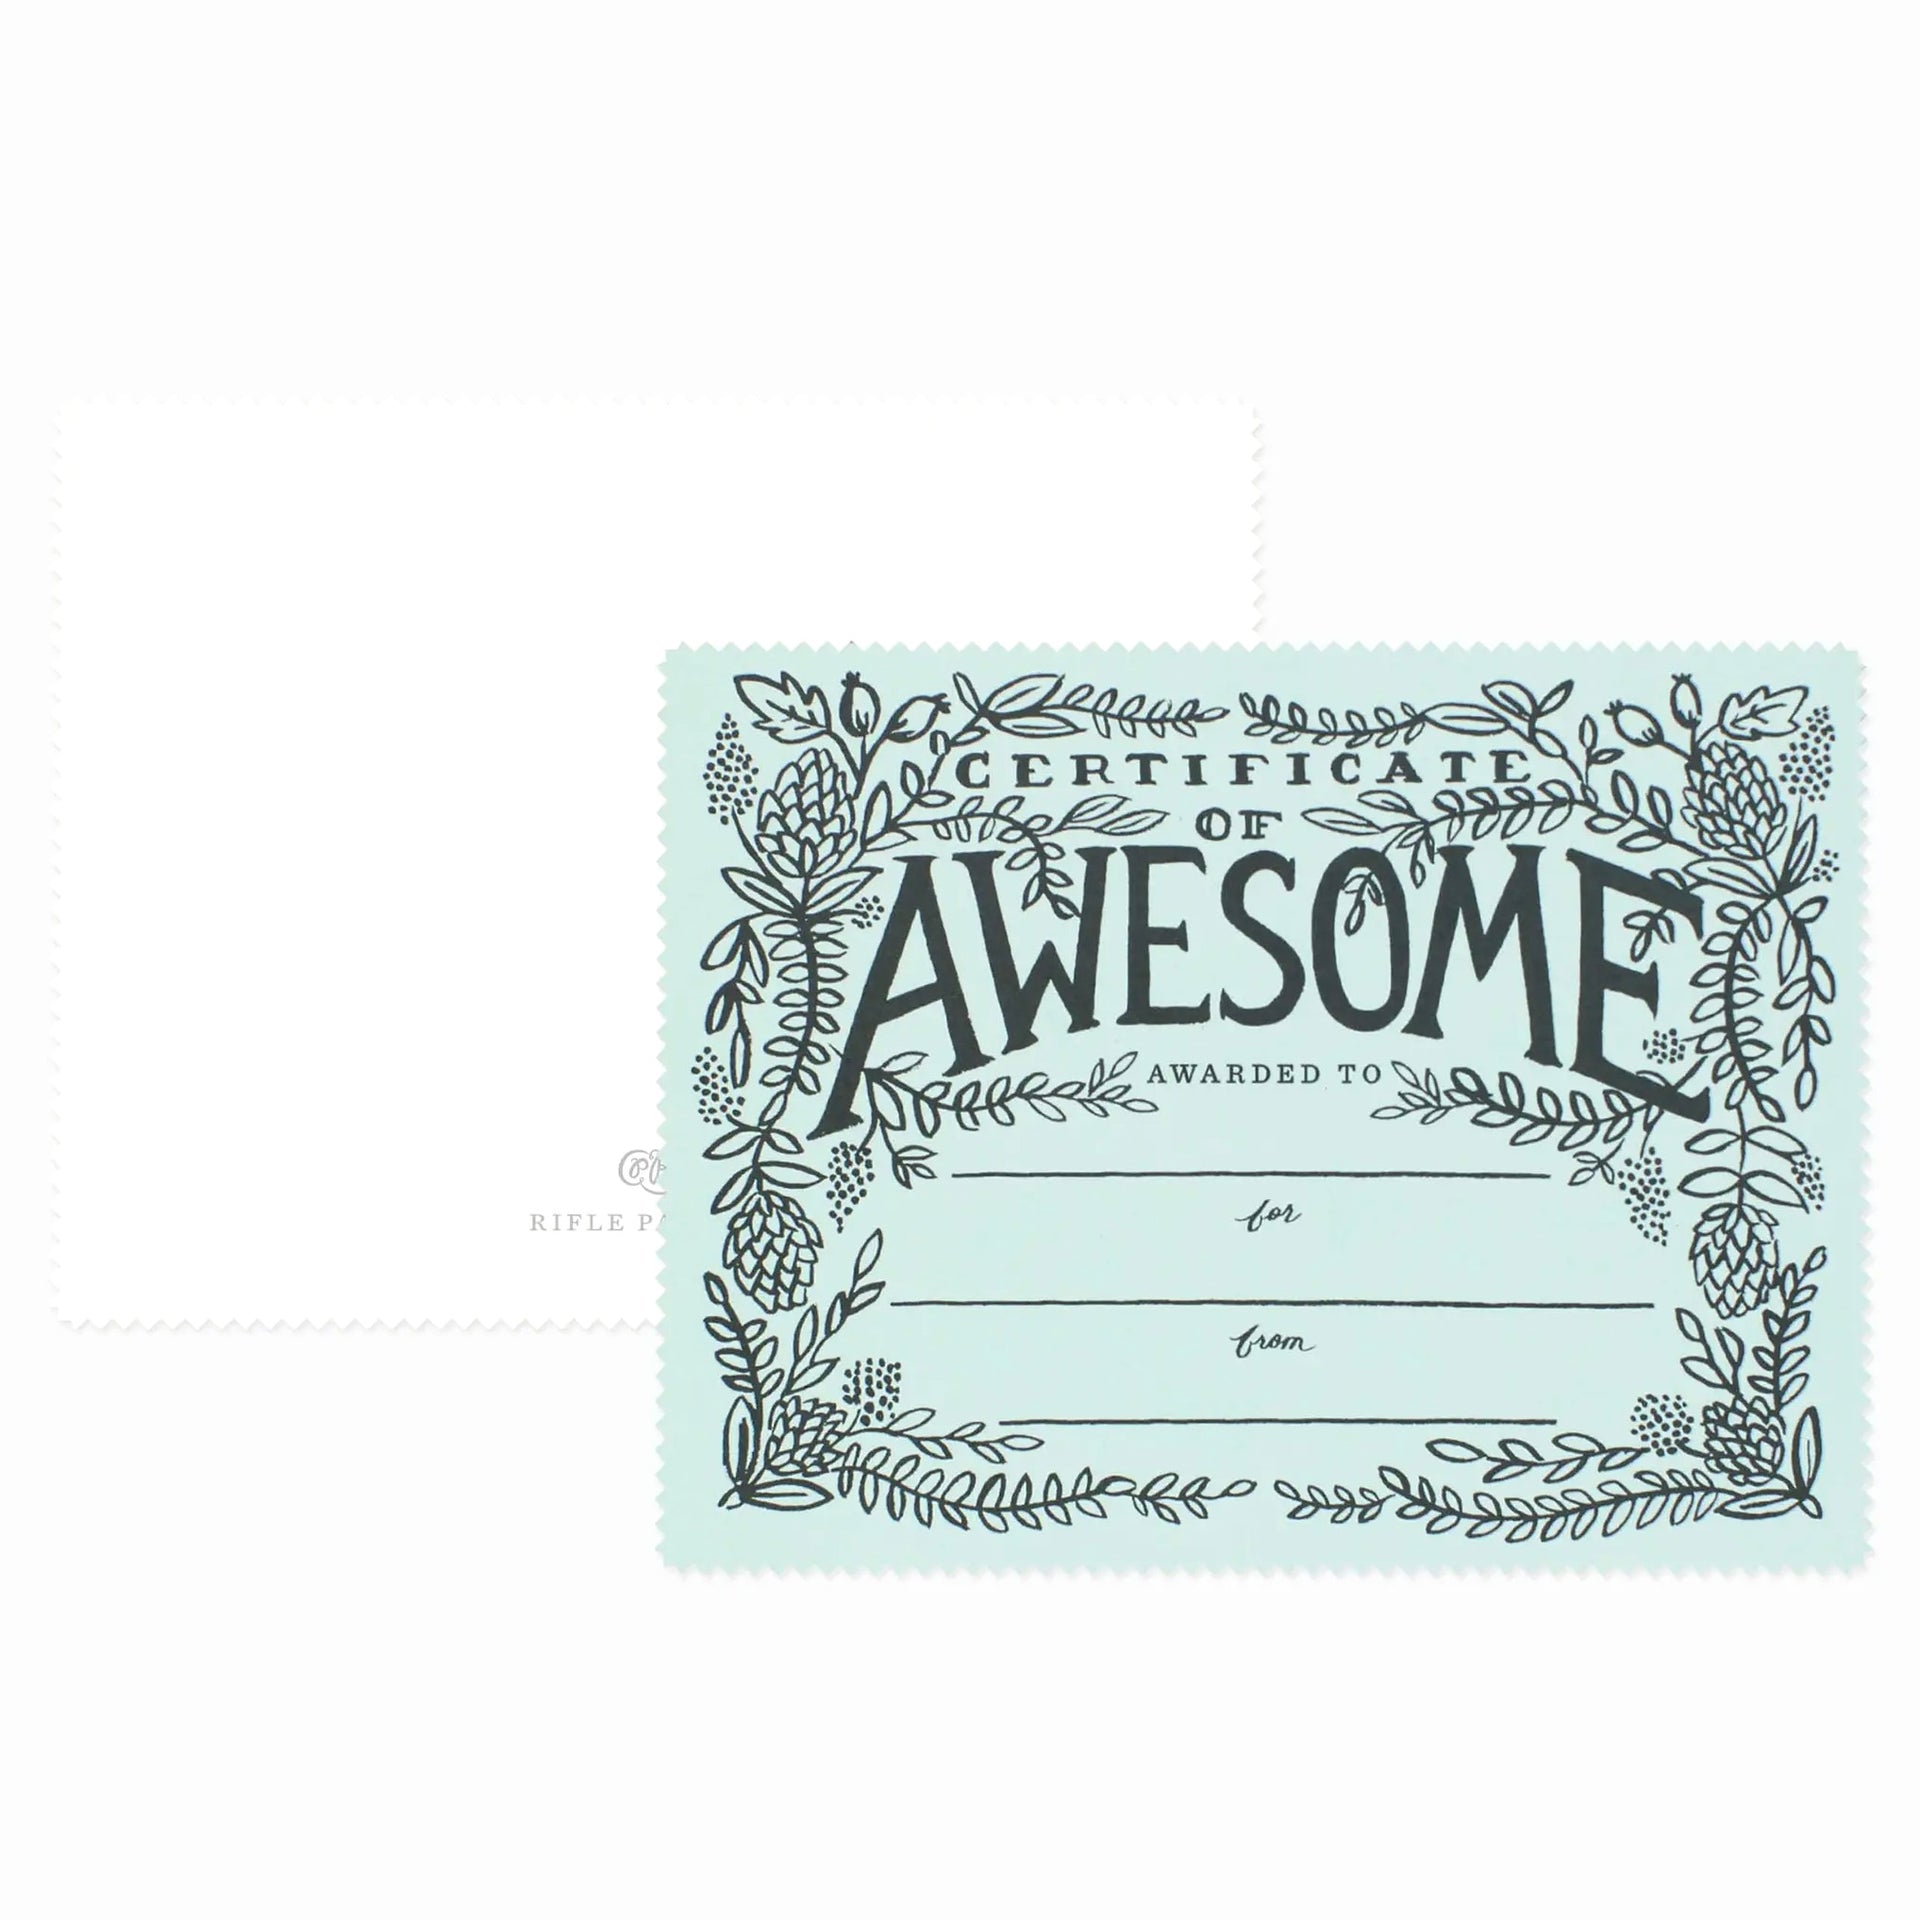 Alt View Certificate of Awesome Card